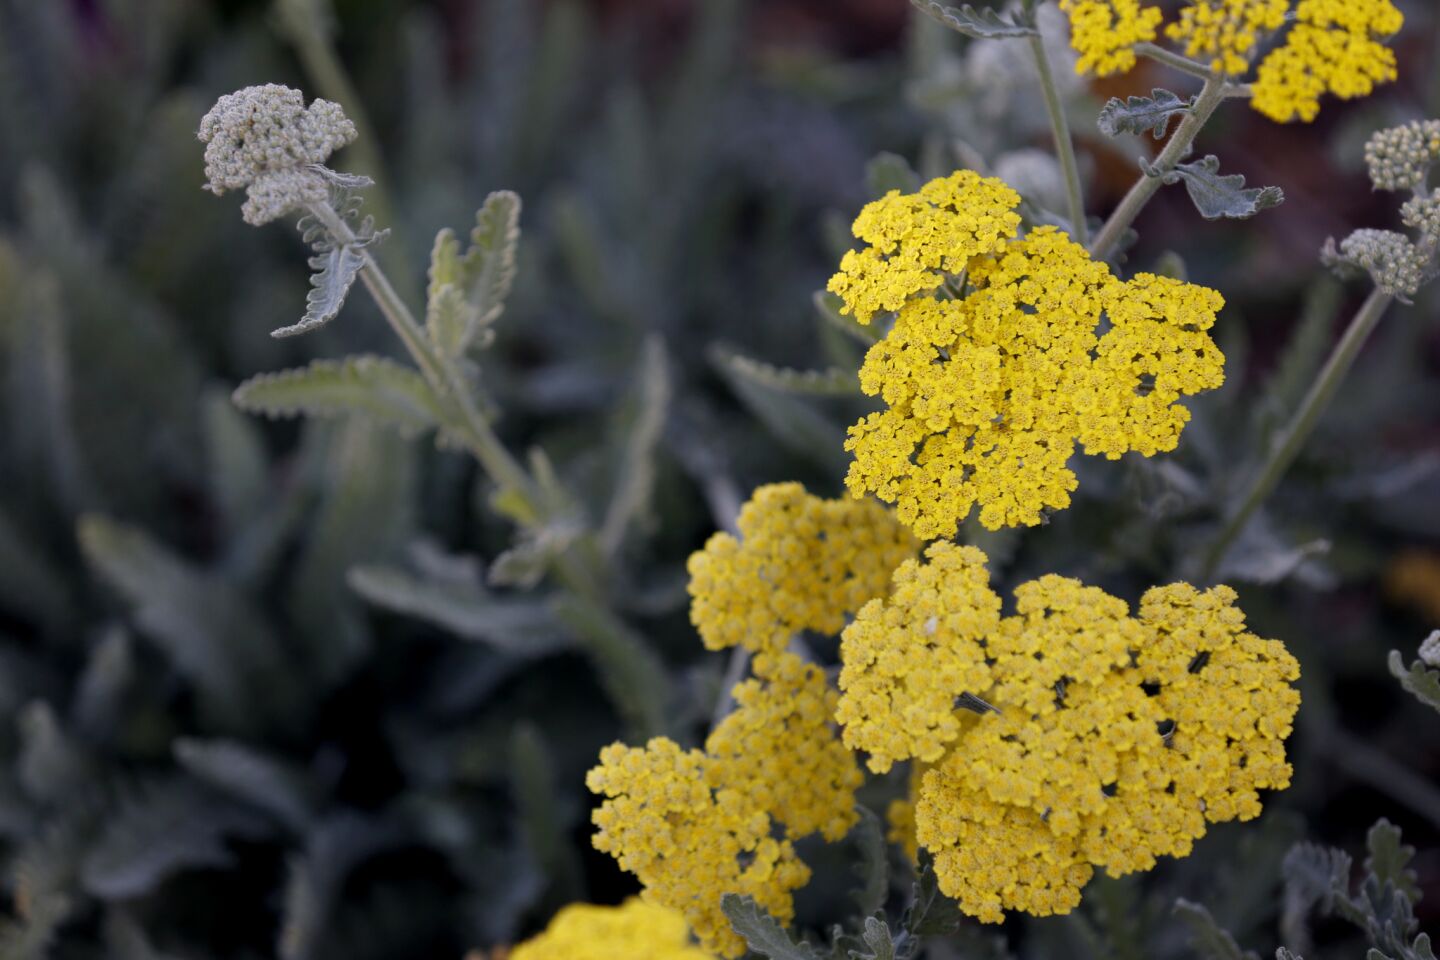 Yellow yarrow adds to the natural look of the Glaser's new garden.